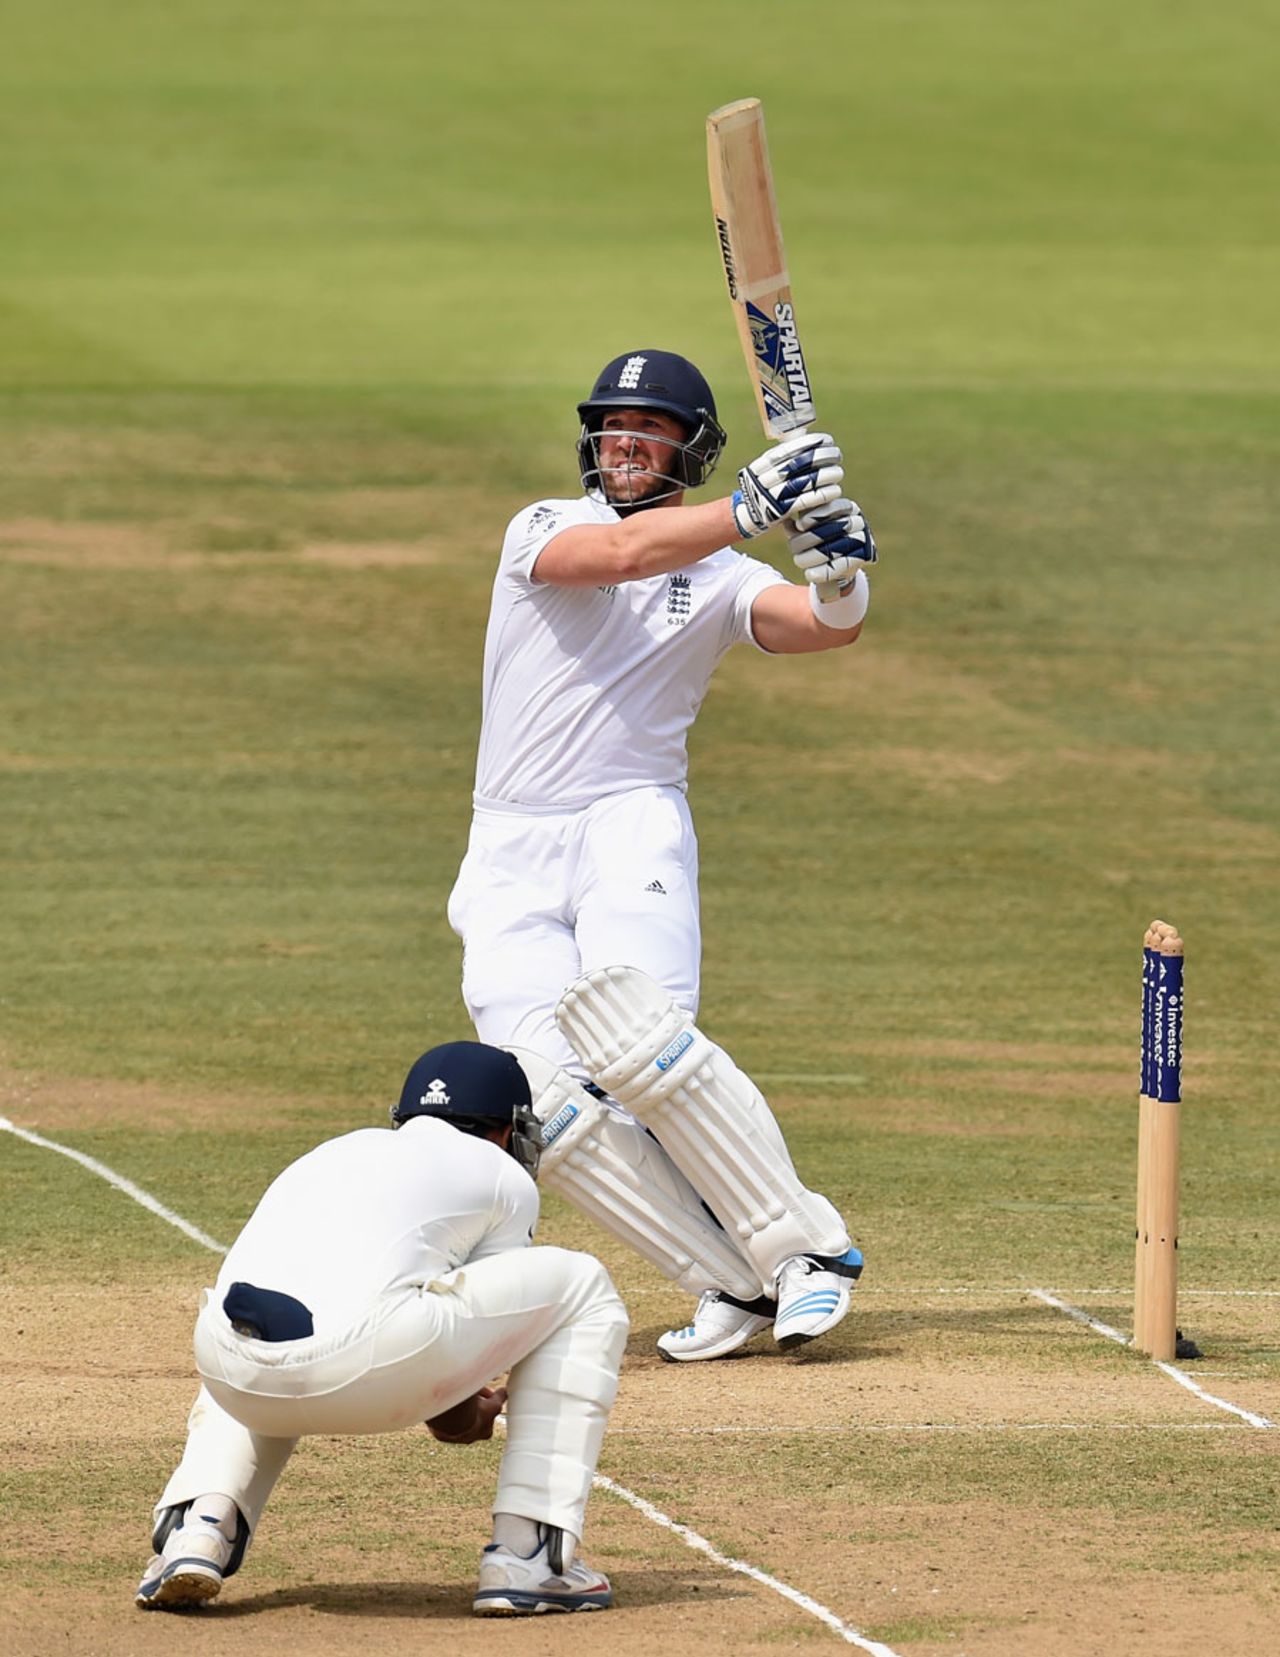 Matt Prior's innings began and ended in a hurry, England v India, 2nd Investec Test, Lord's, 5th day, July 21, 2014